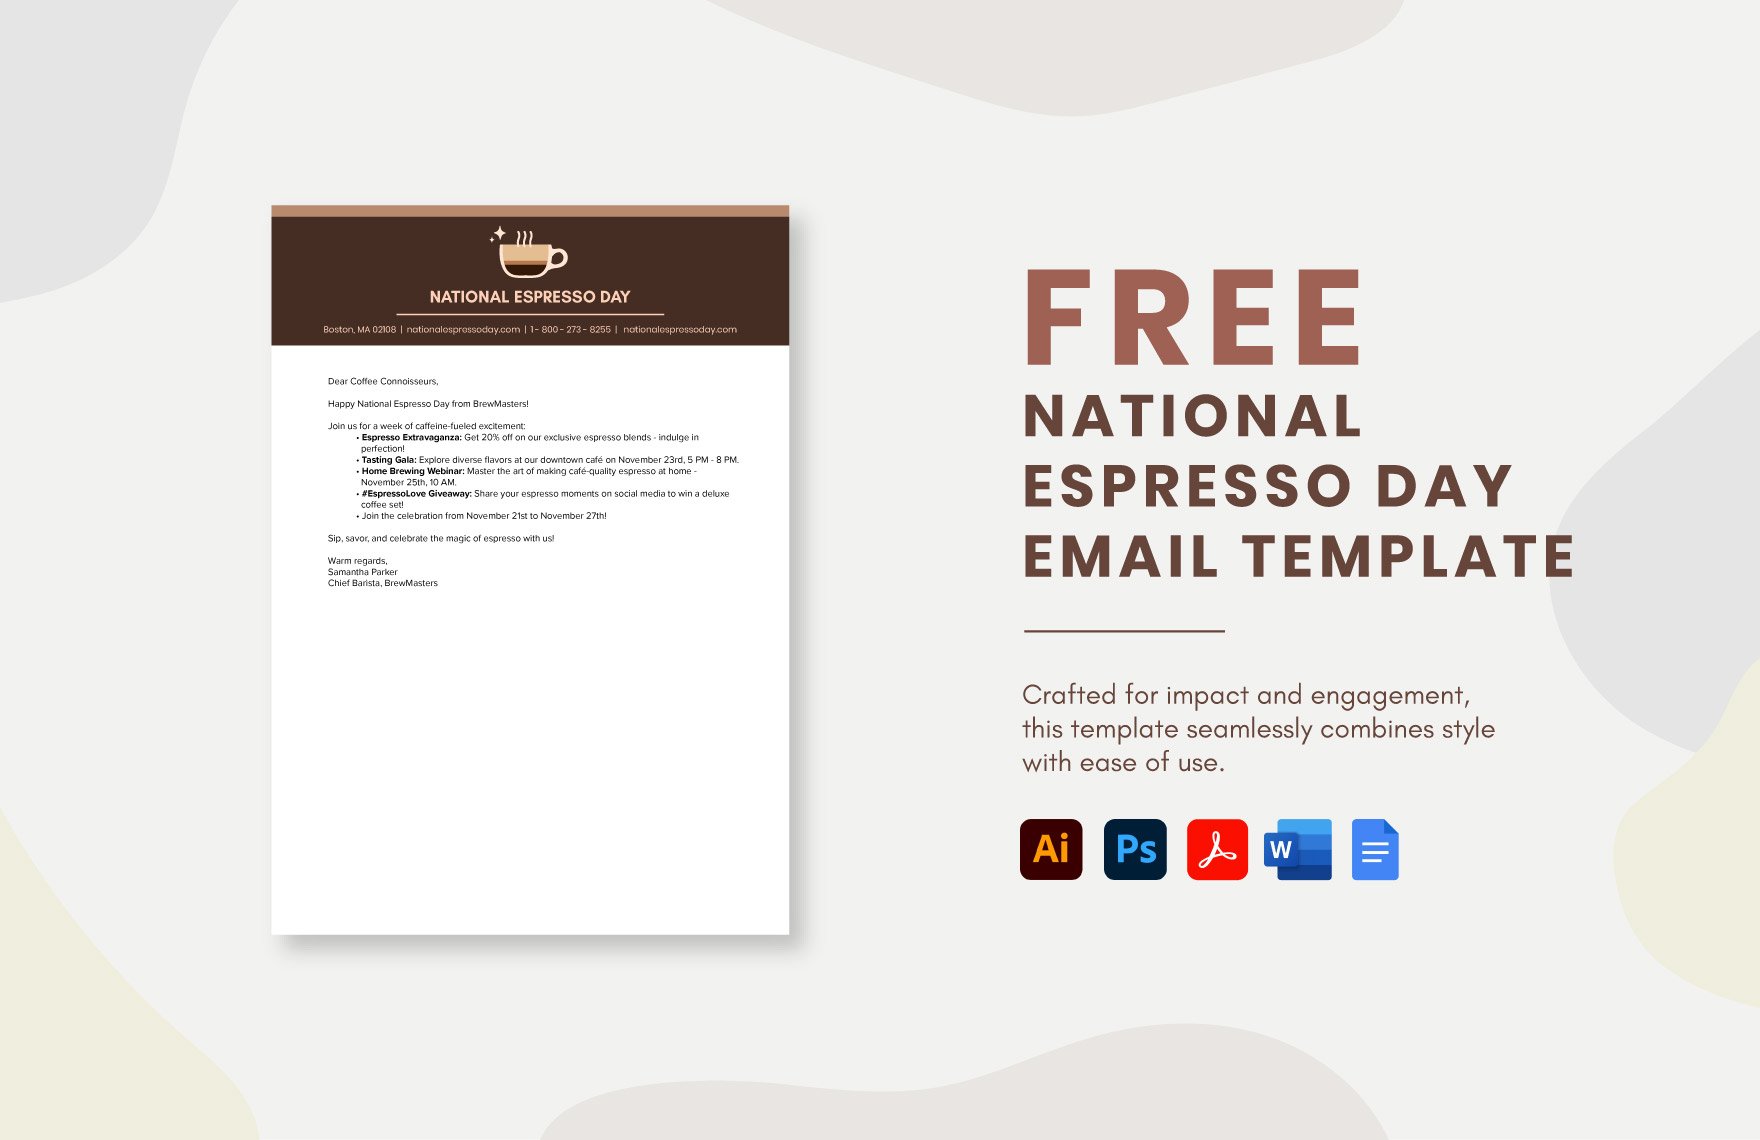 Free National Espresso Day Email Template in Word, Google Docs, PDF, Illustrator, PSD